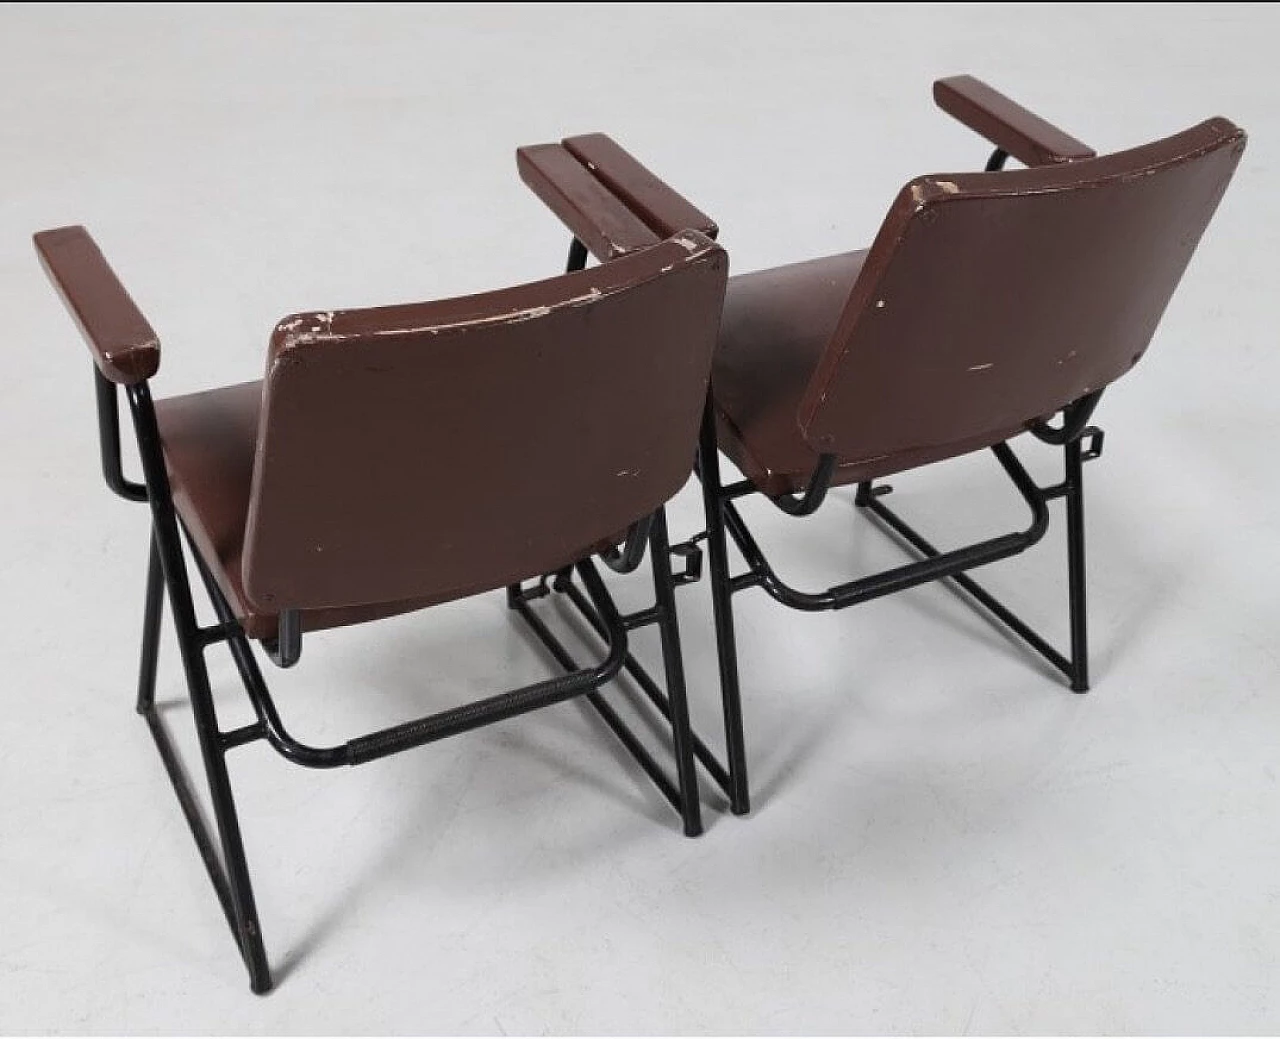 12 Chairs in lacquered wood and iron rodby by BBPR for Michelin Sport Club D.A.M.I., 30s 1197987